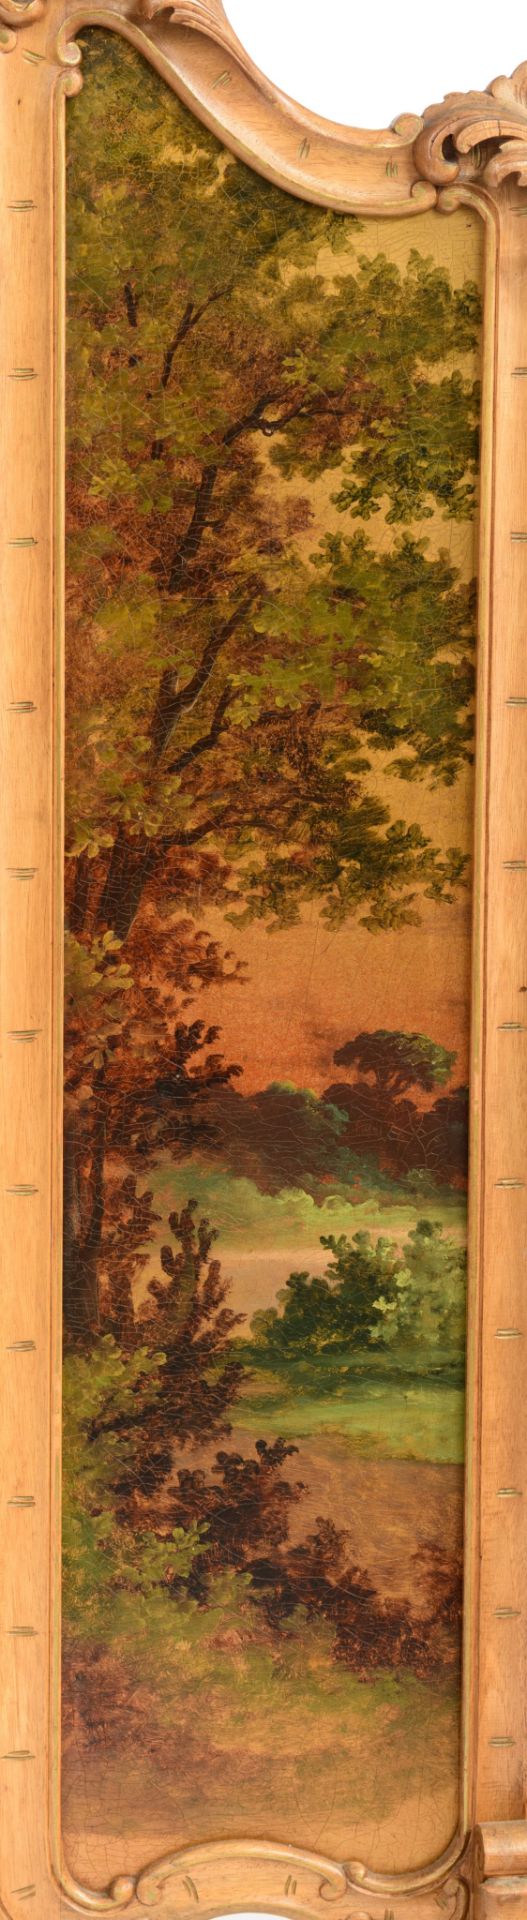 A Rococo style fire screen, with a romantic scene in the 'Vernis Martin' manner, H 148 - W 52 - 106 - Image 4 of 7